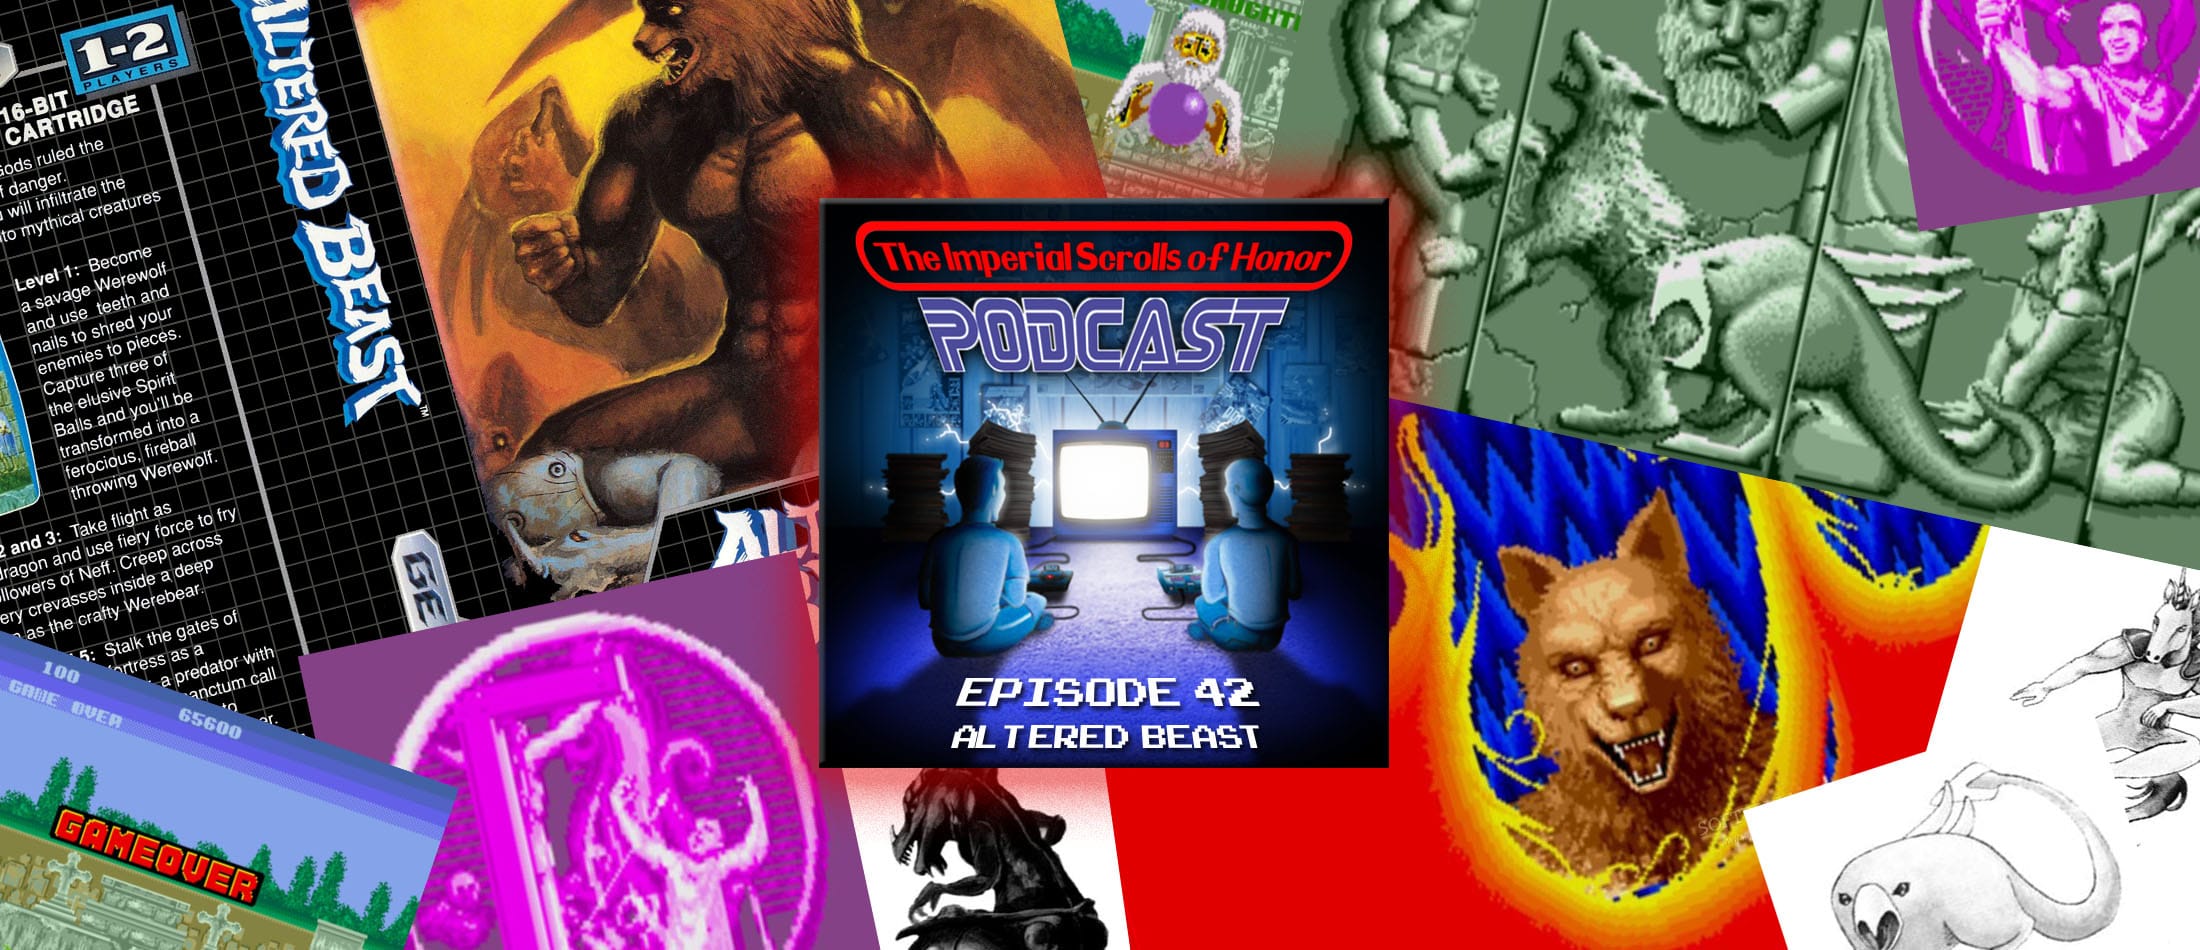 The Imperial Scrolls of Honor Podcast - Episode 42 - Altered Beast (GEN)